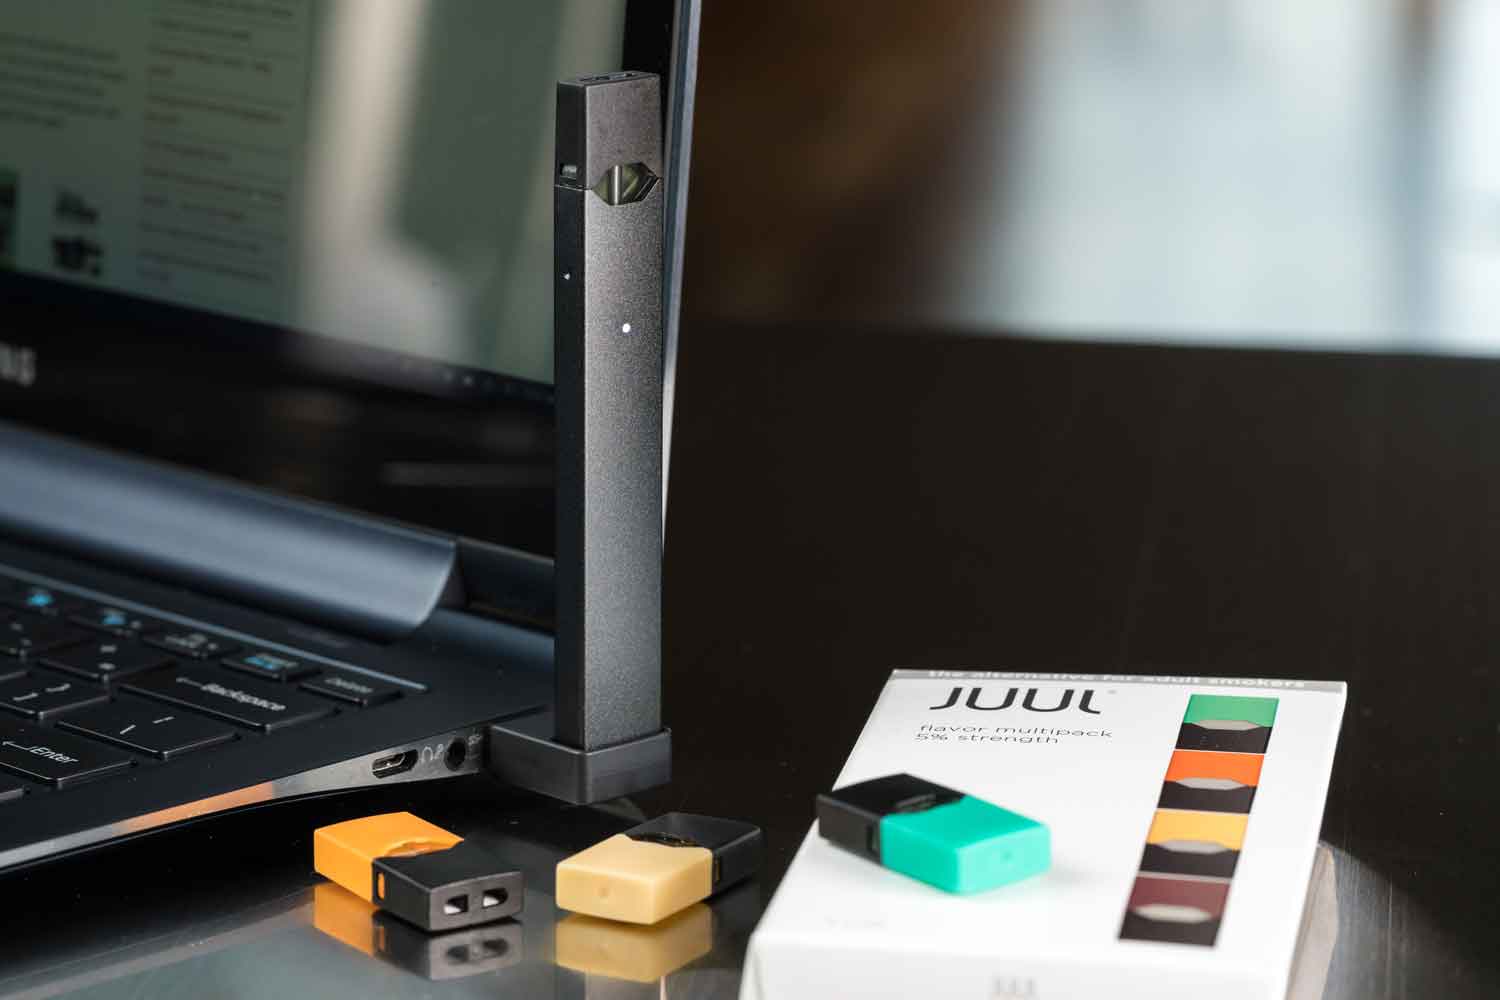  Juul Requests Stay of FDA Order